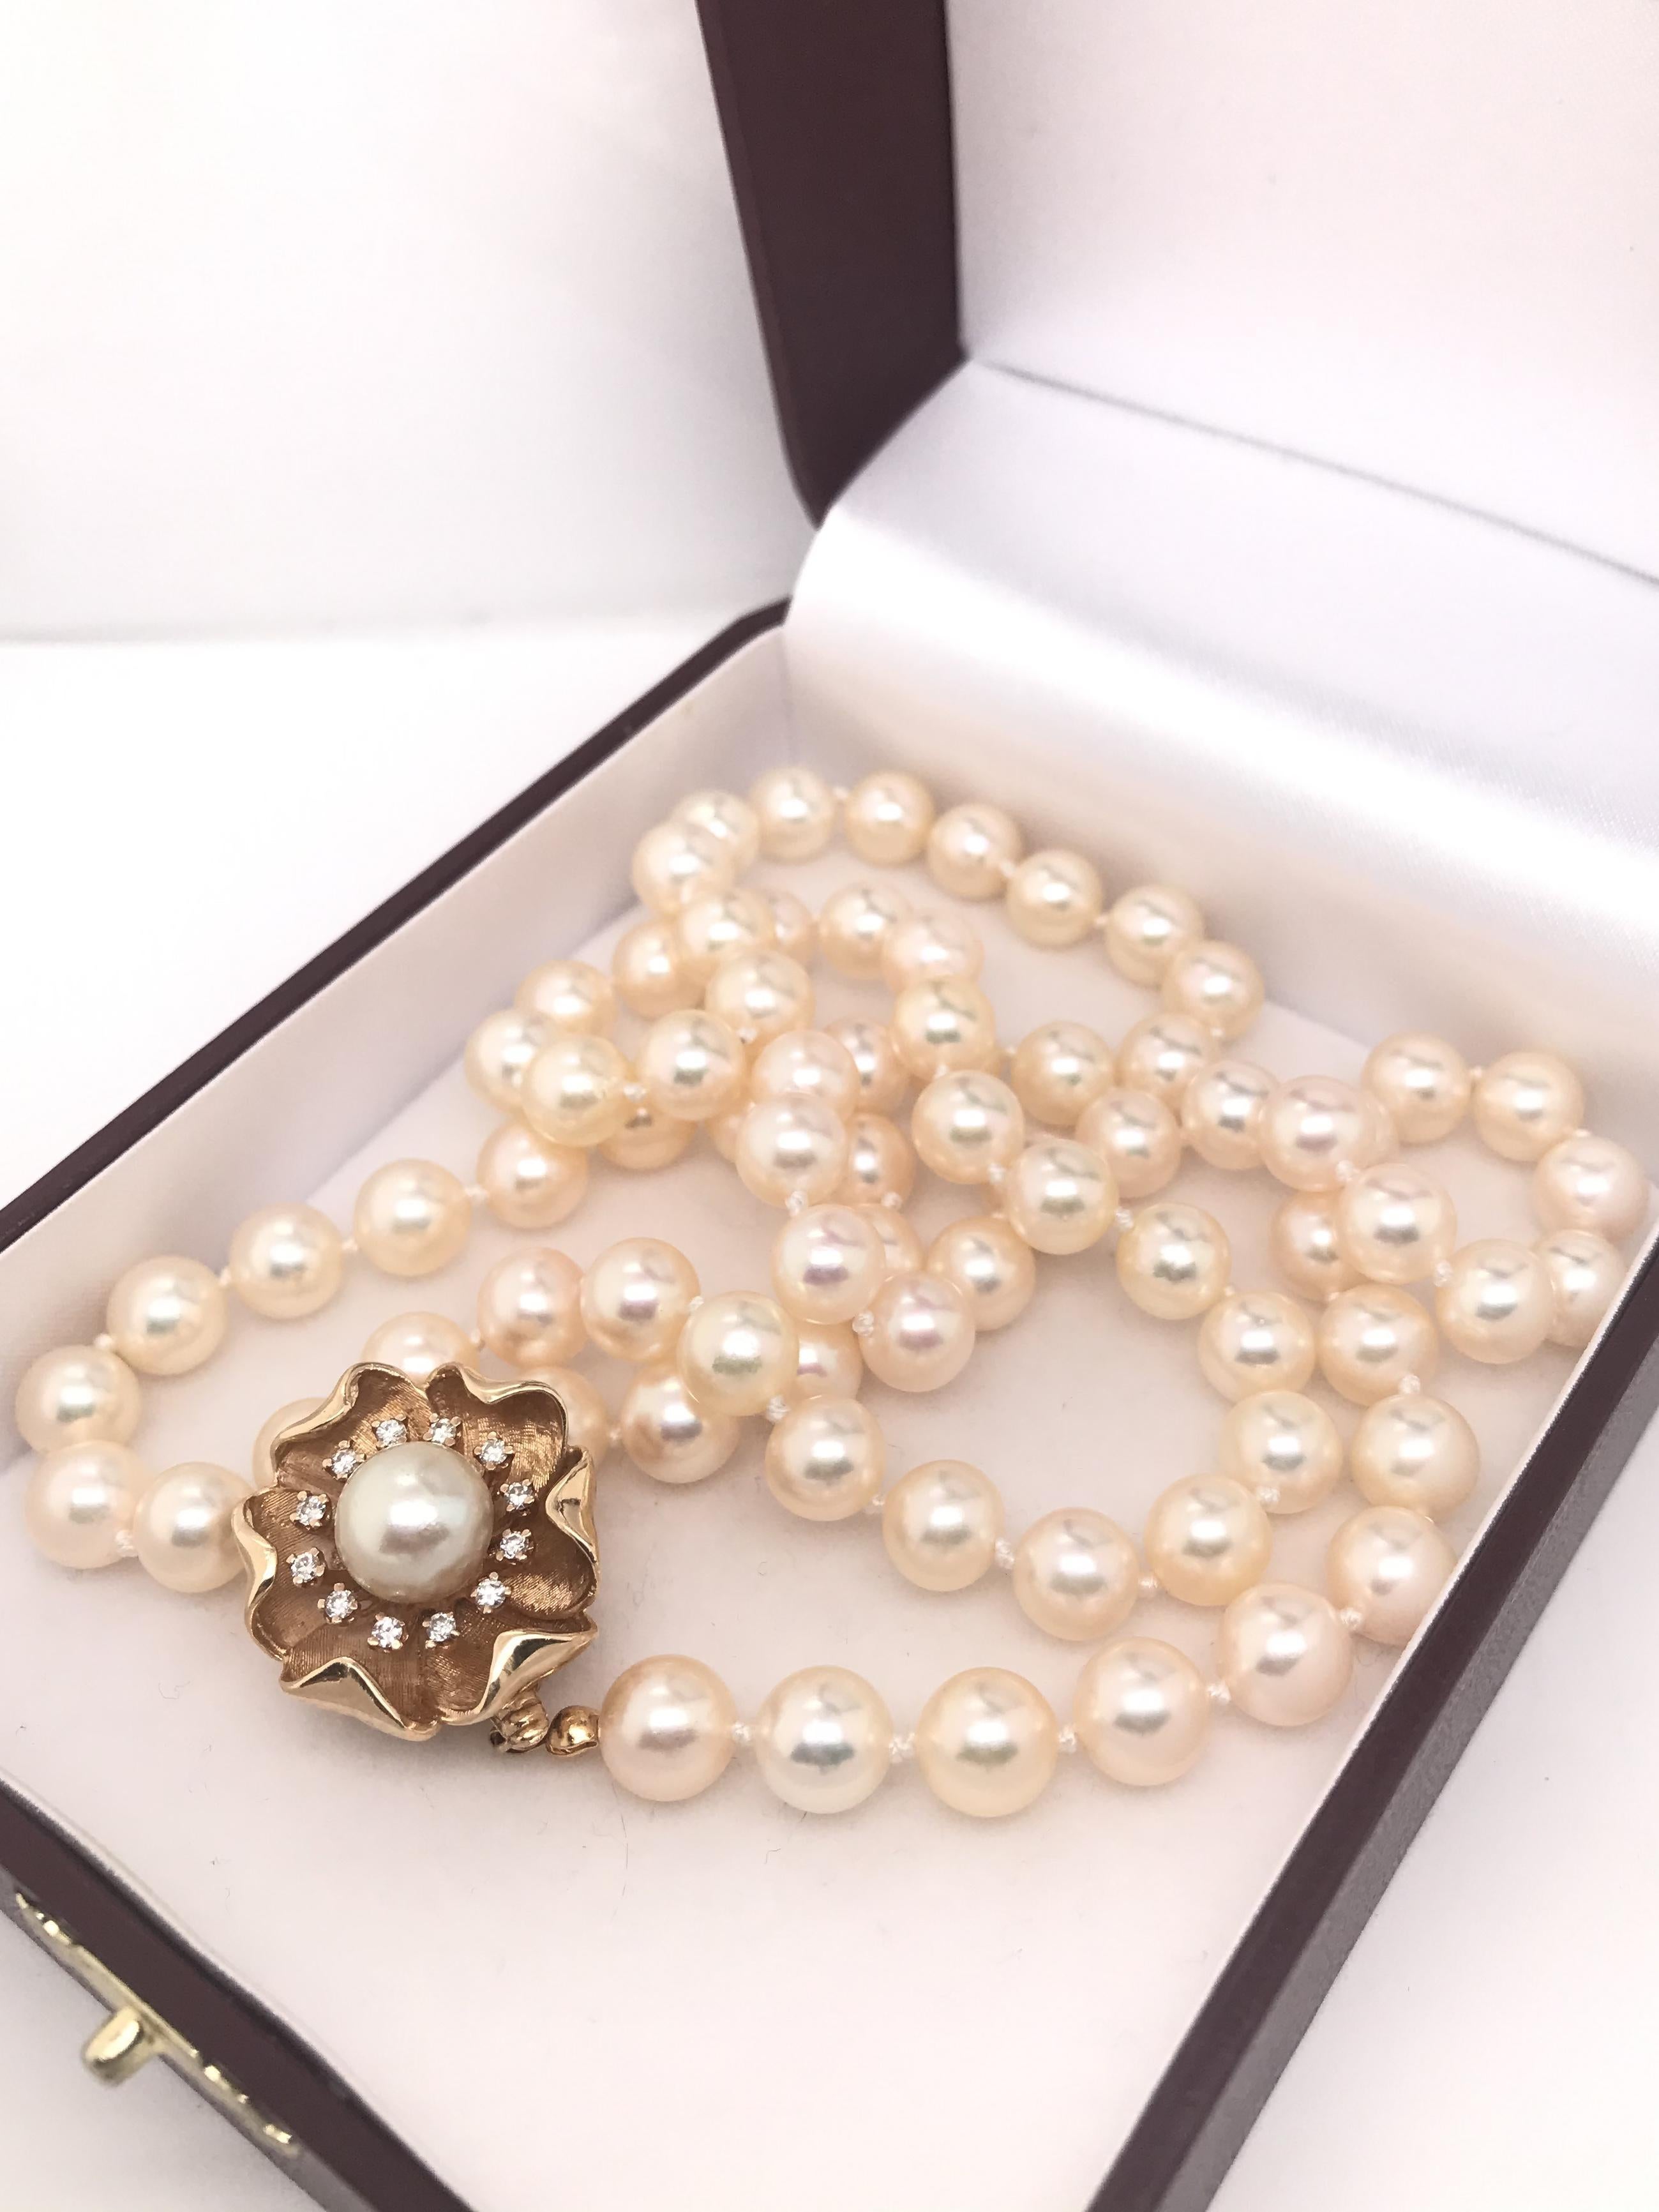 Women's Vintage Mid Century 7.5 Mm Pearl Necklace With Floral Diamond Clasp